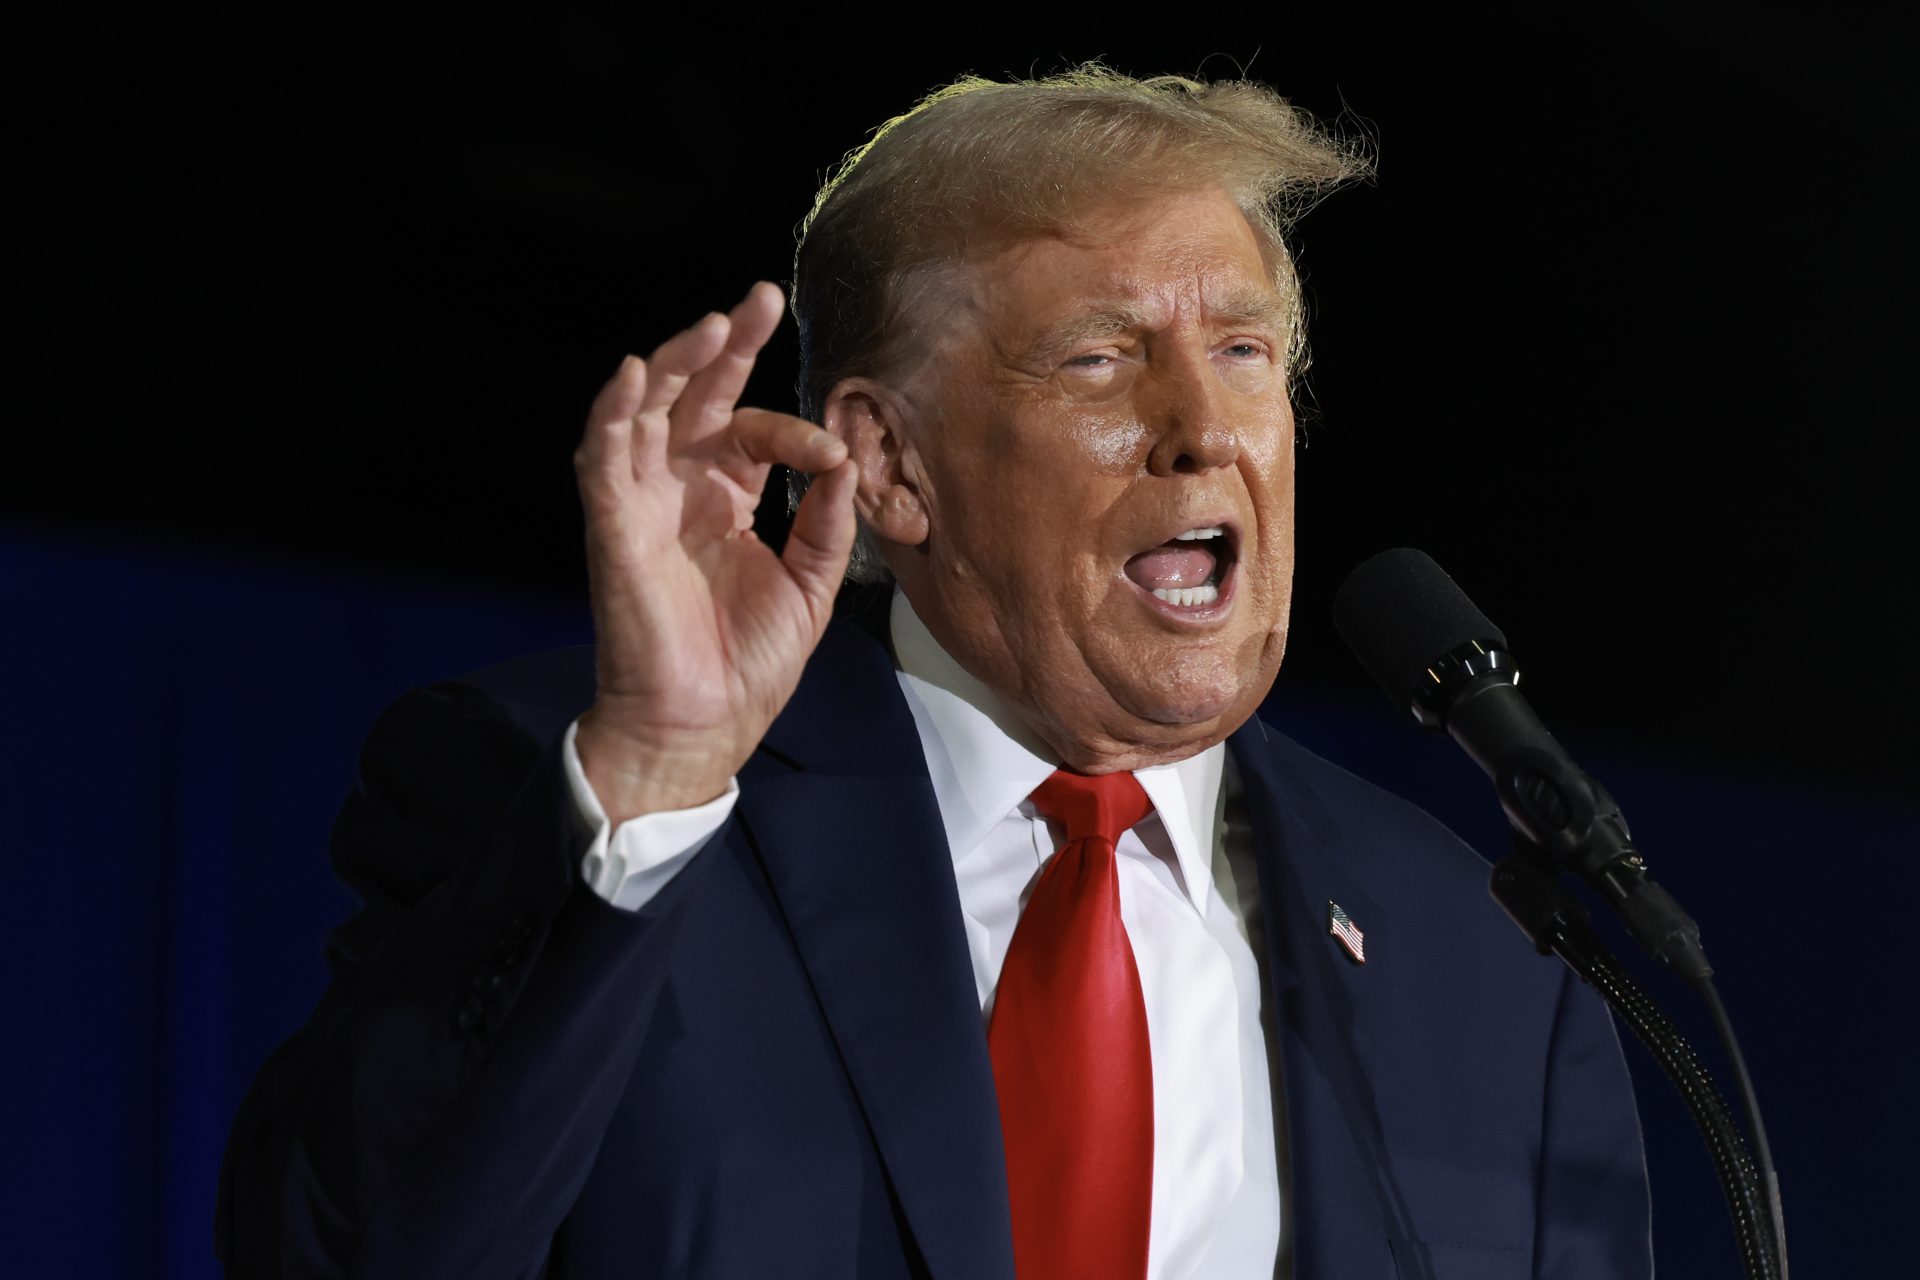 Trump claims Biden is dropping out and insults Kamala Harris